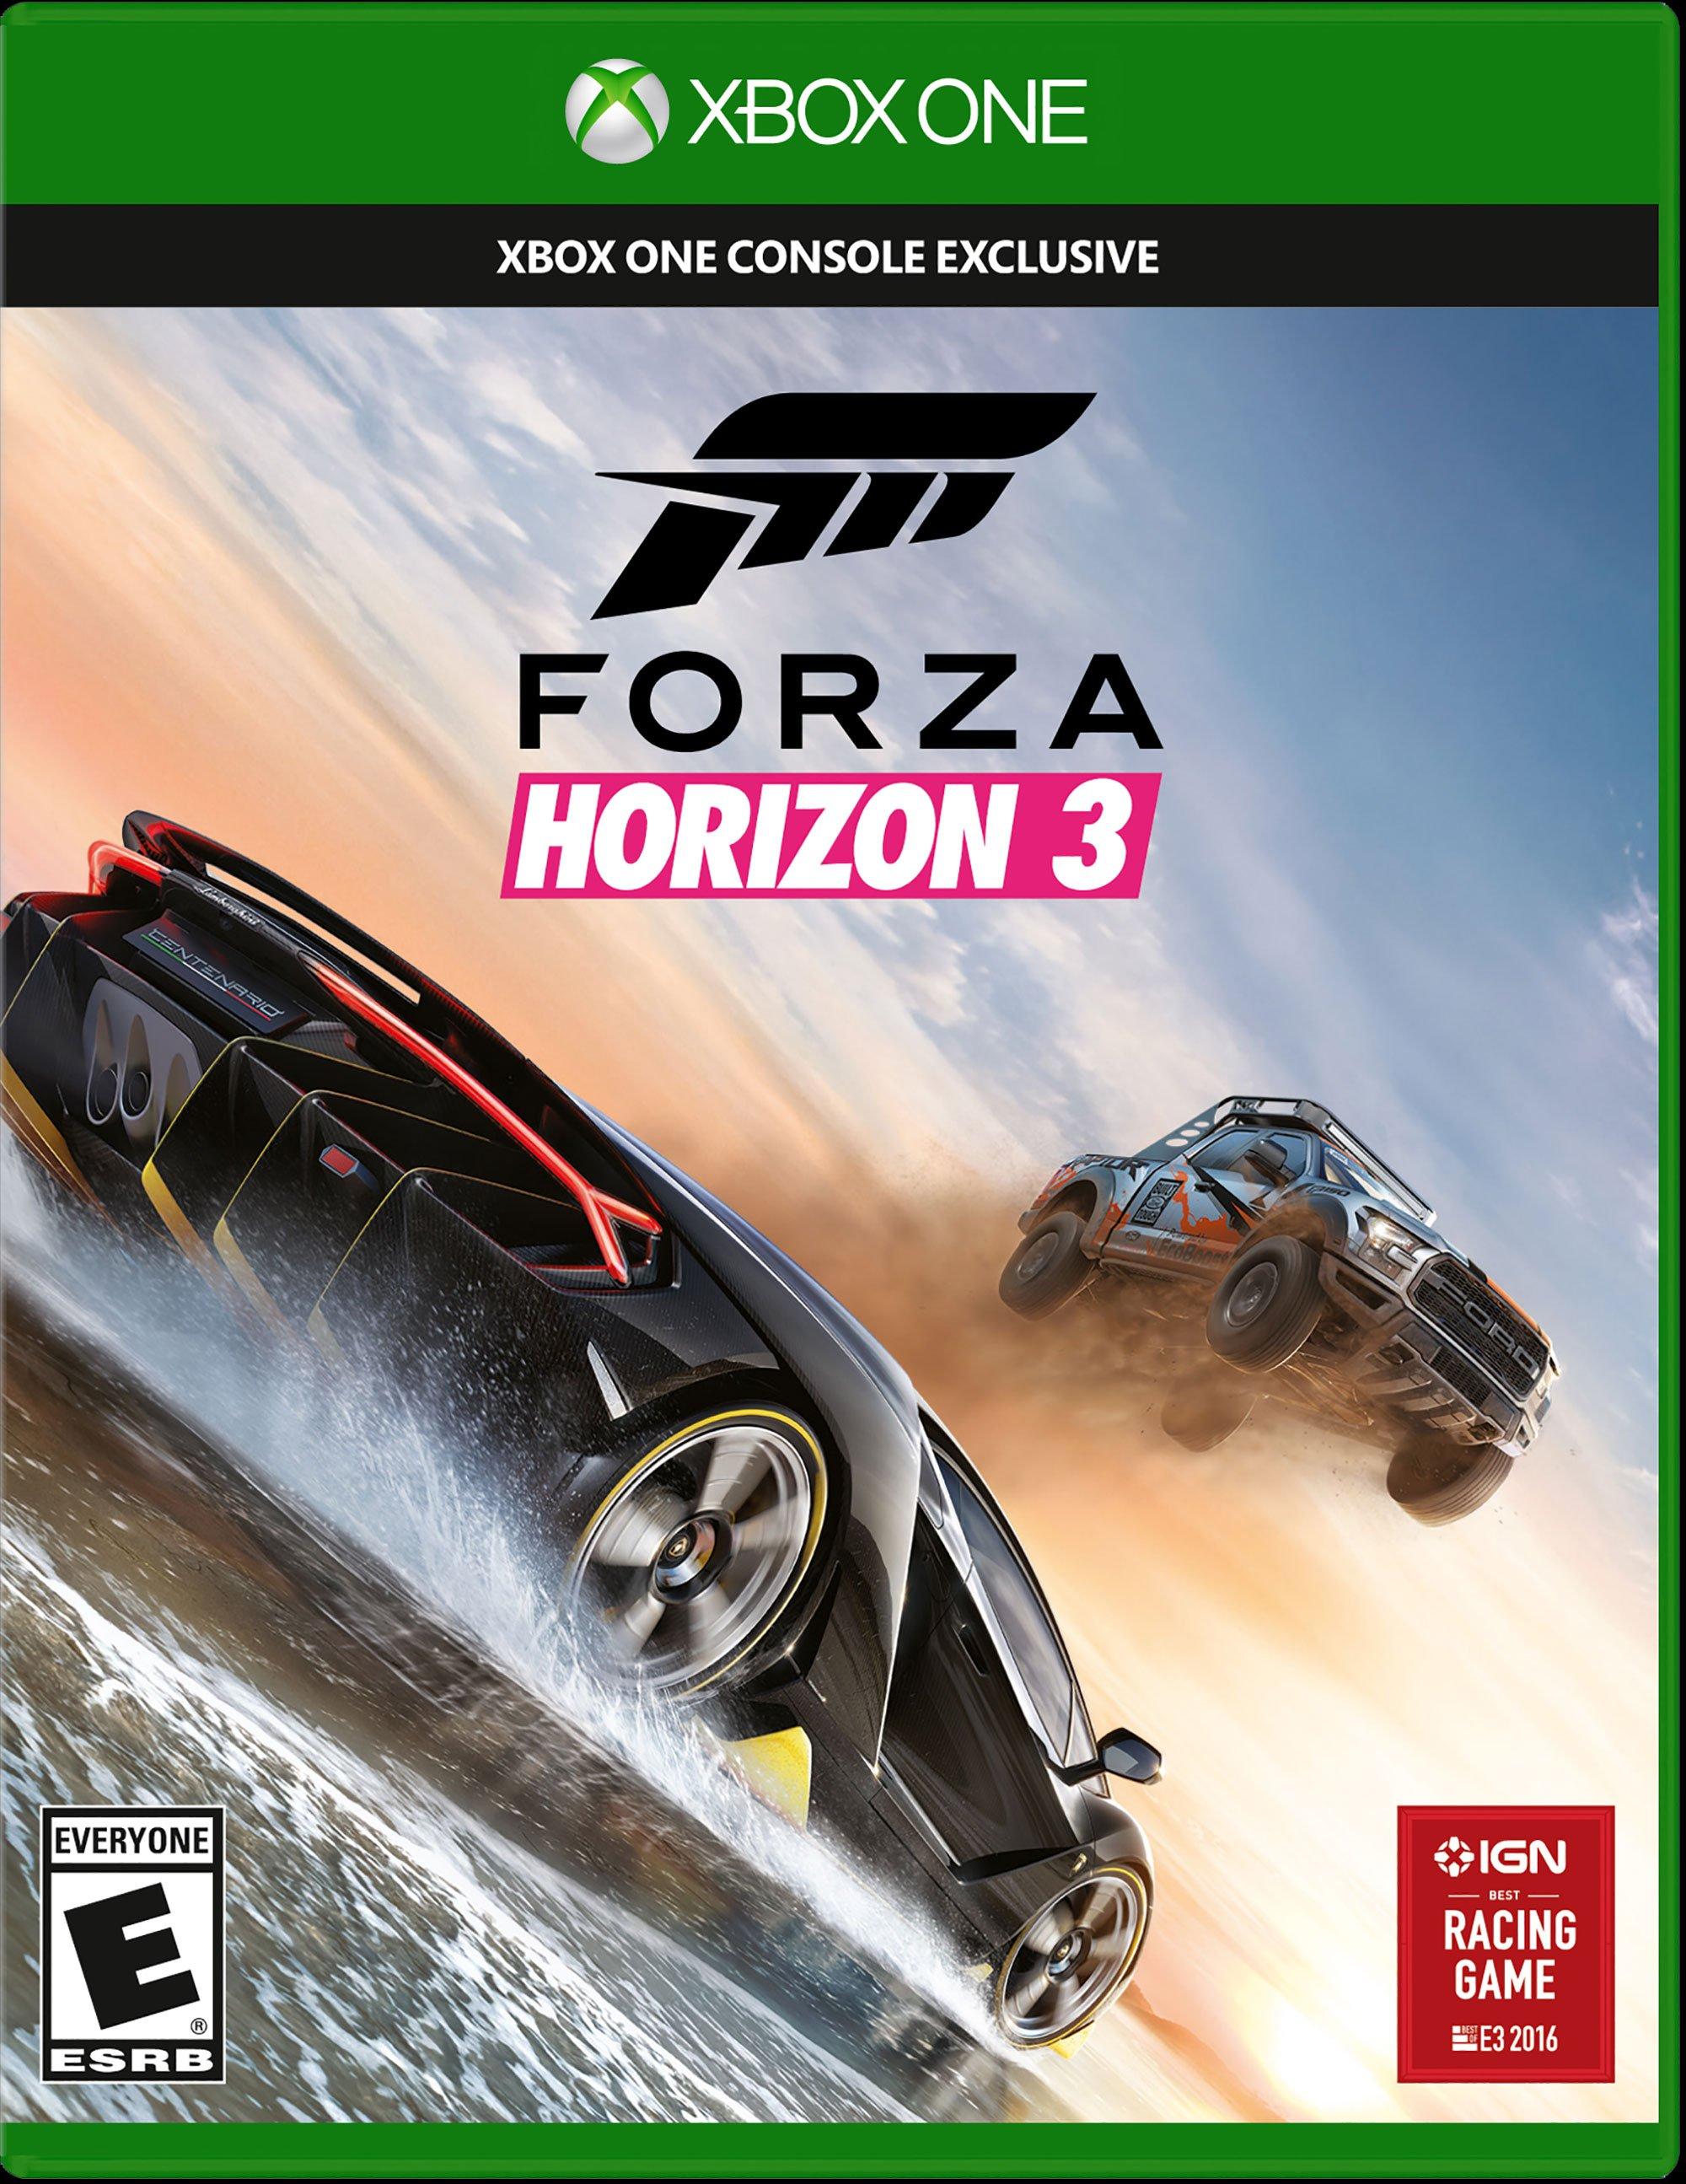 forza video game